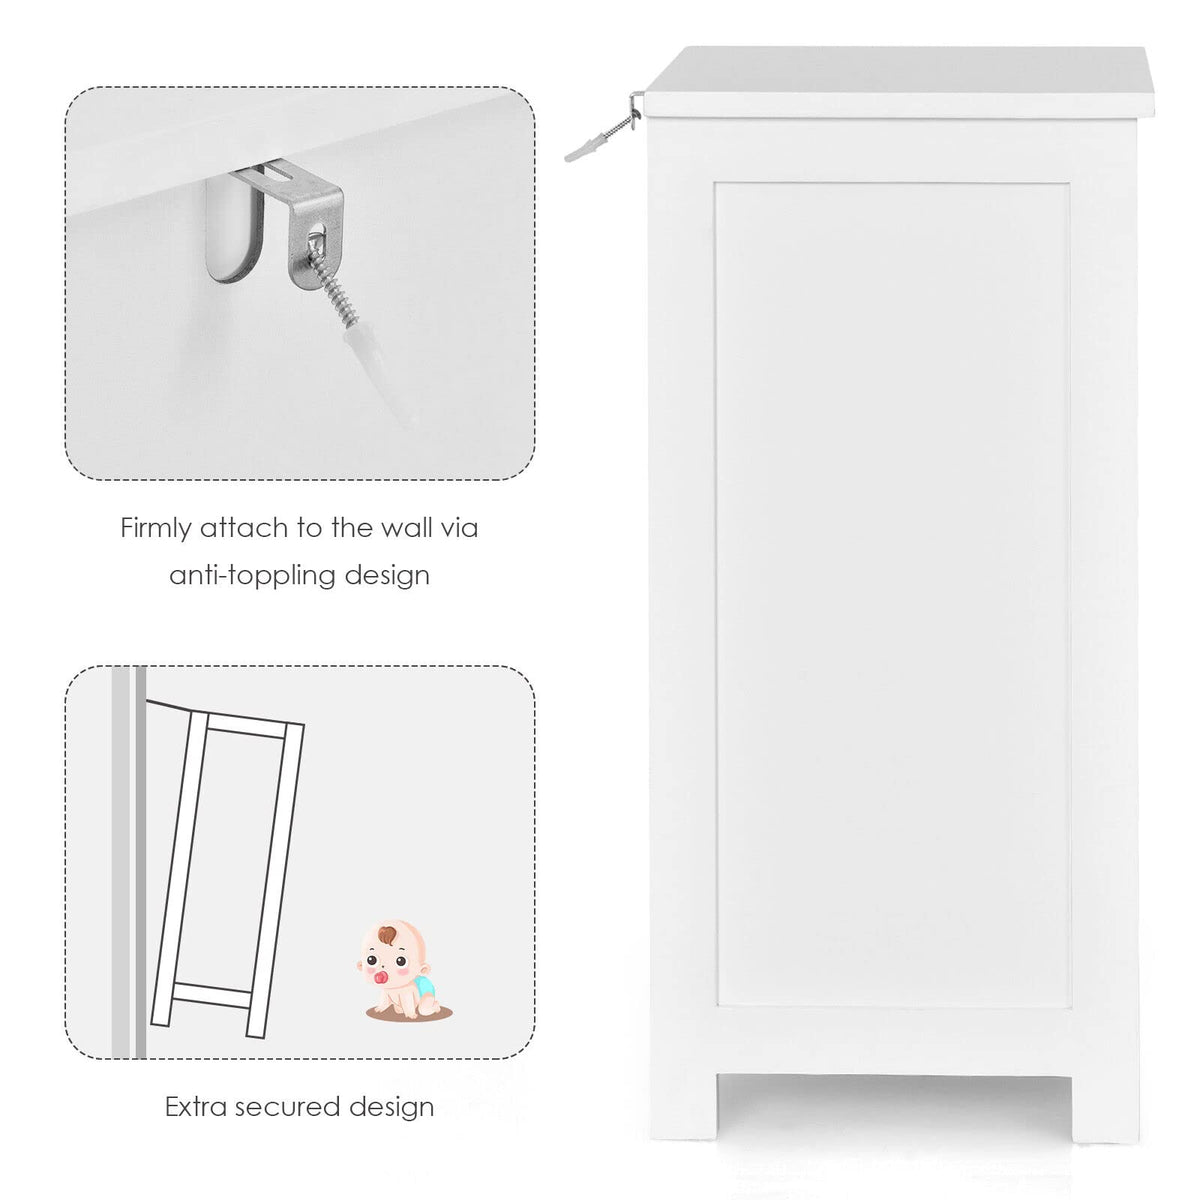 Giantex Bathroom Floor Cabinet, Side Storage Organizer Cabinet with 3 Drawers, Anti-Toppling Kit, White